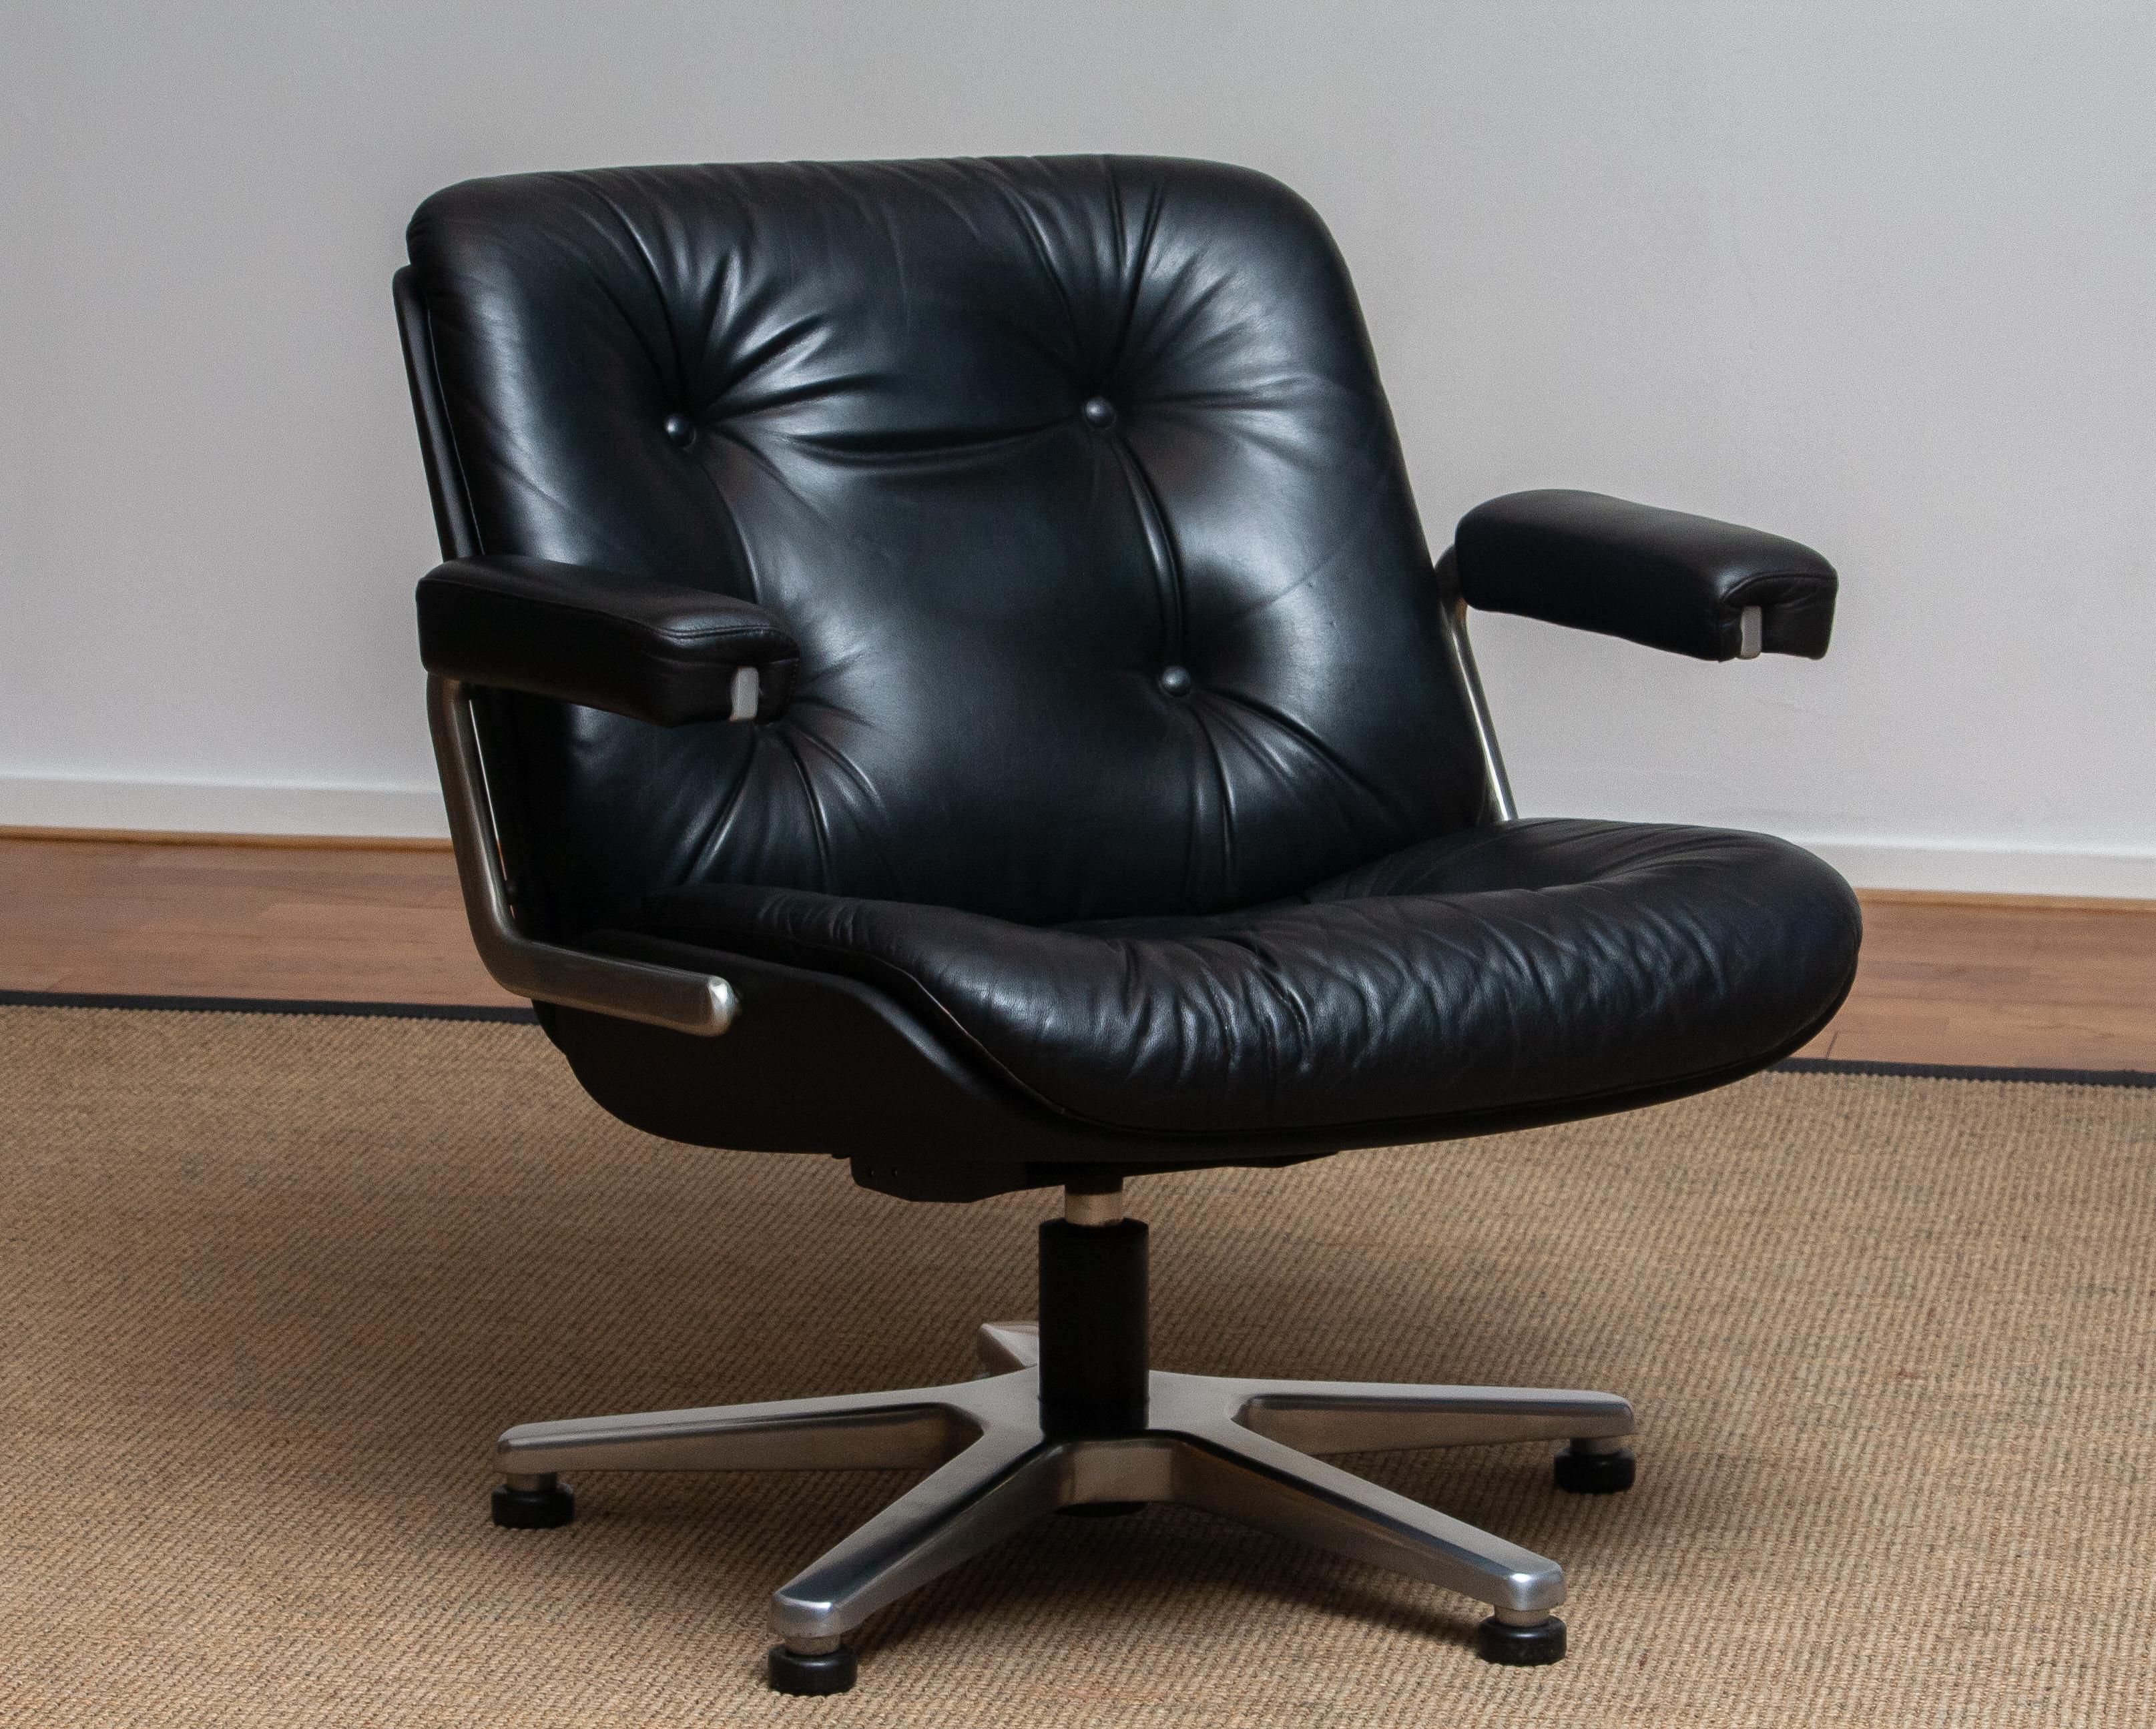 1960s, Black Leather Swivel Chair by Martin Stoll for Giroflex Stoll Mdl, 7065 2